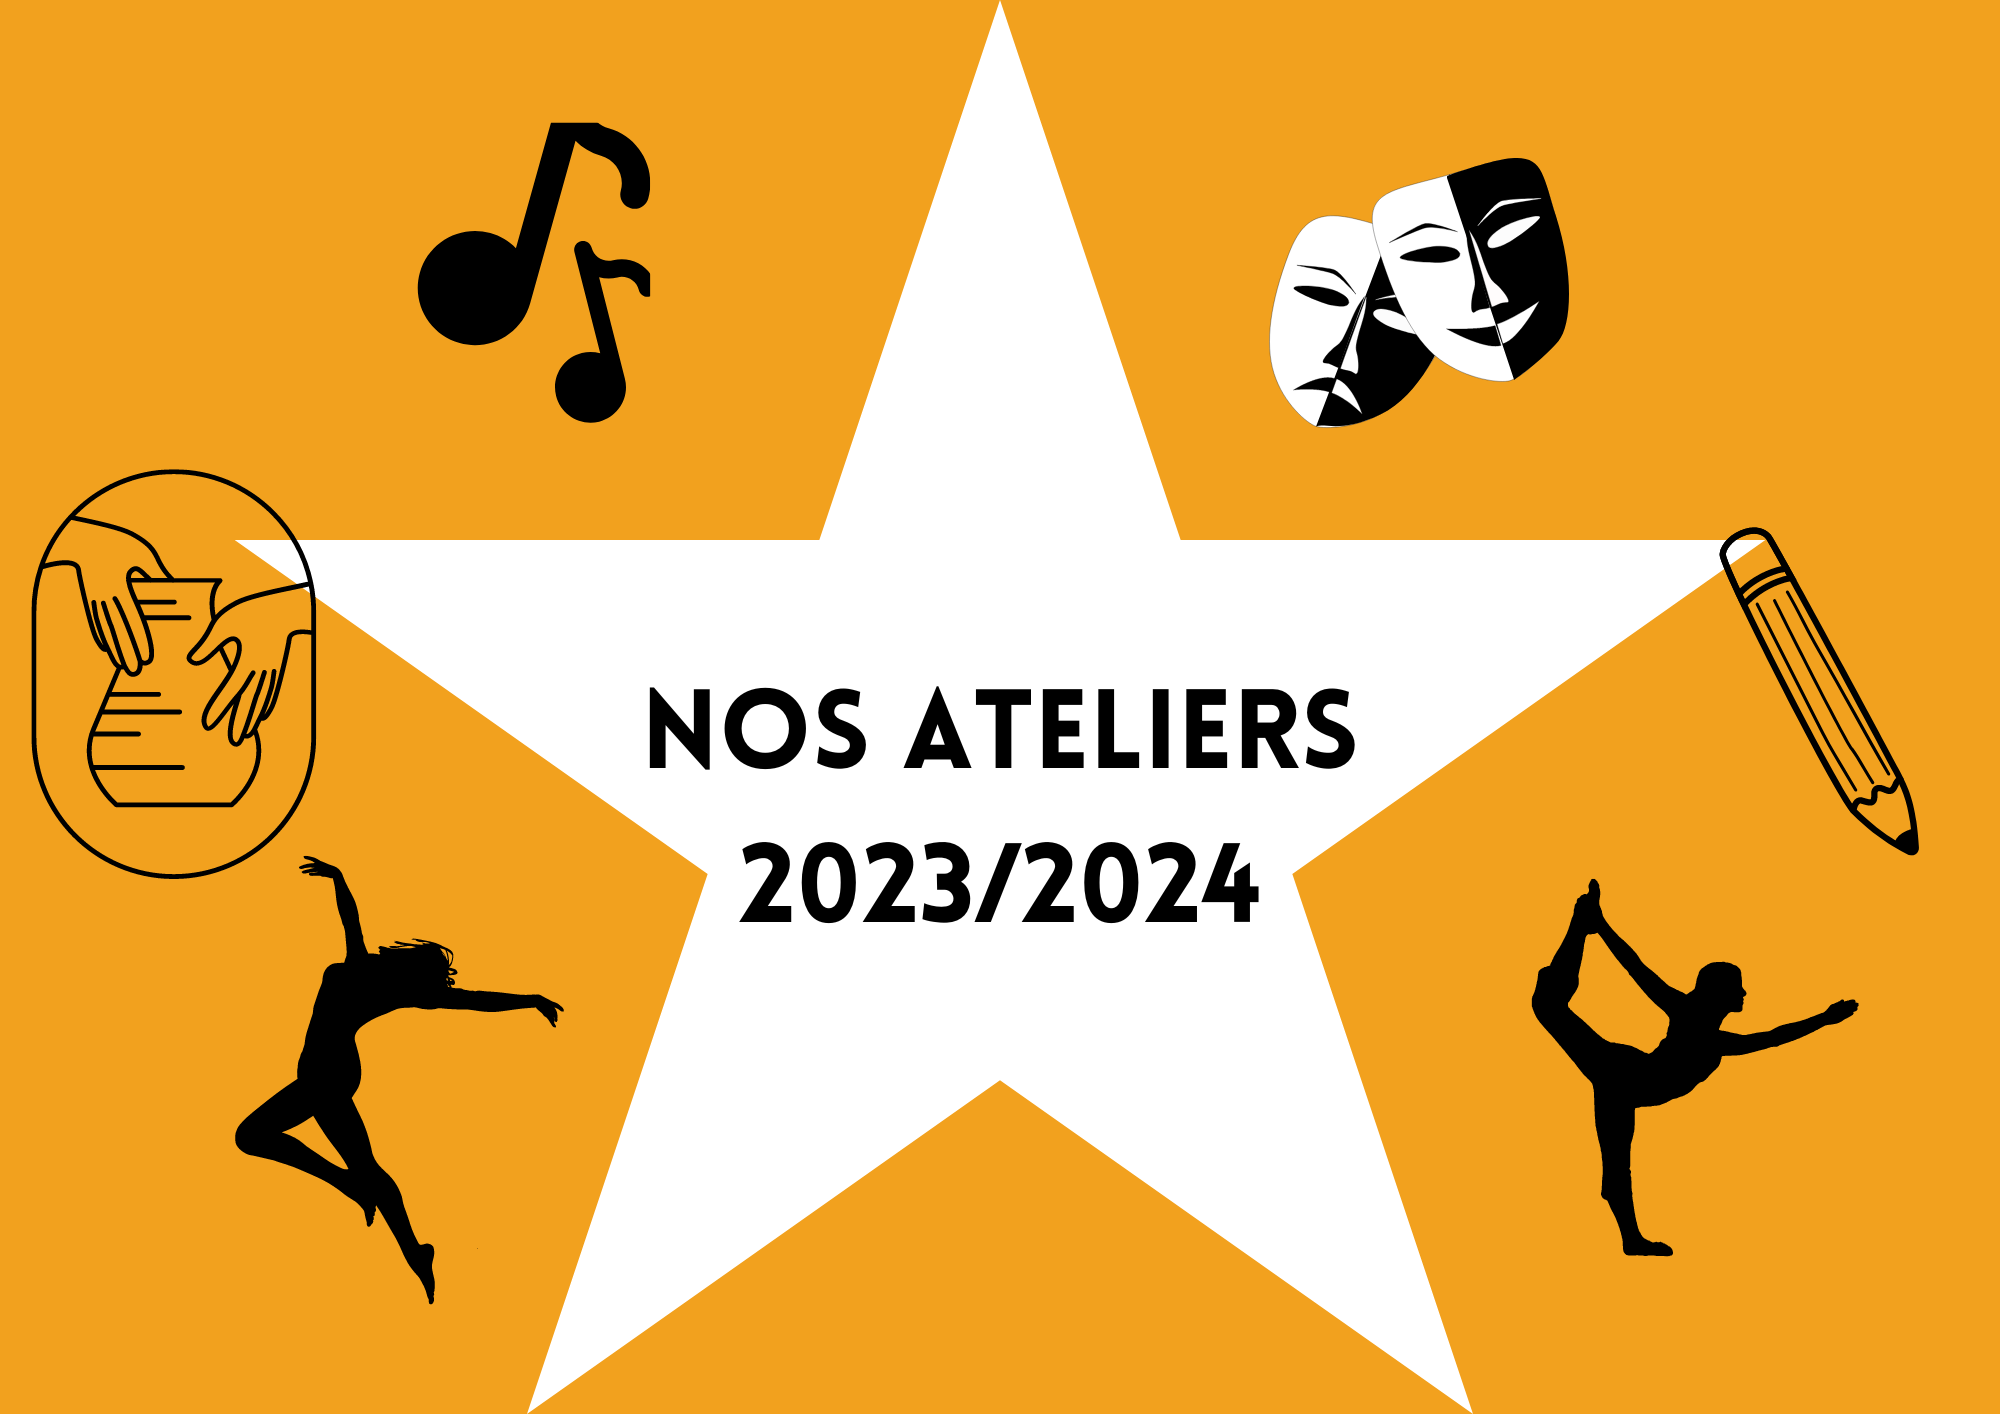 You are currently viewing Nos ateliers enfants, ados et adultes 2023/2024